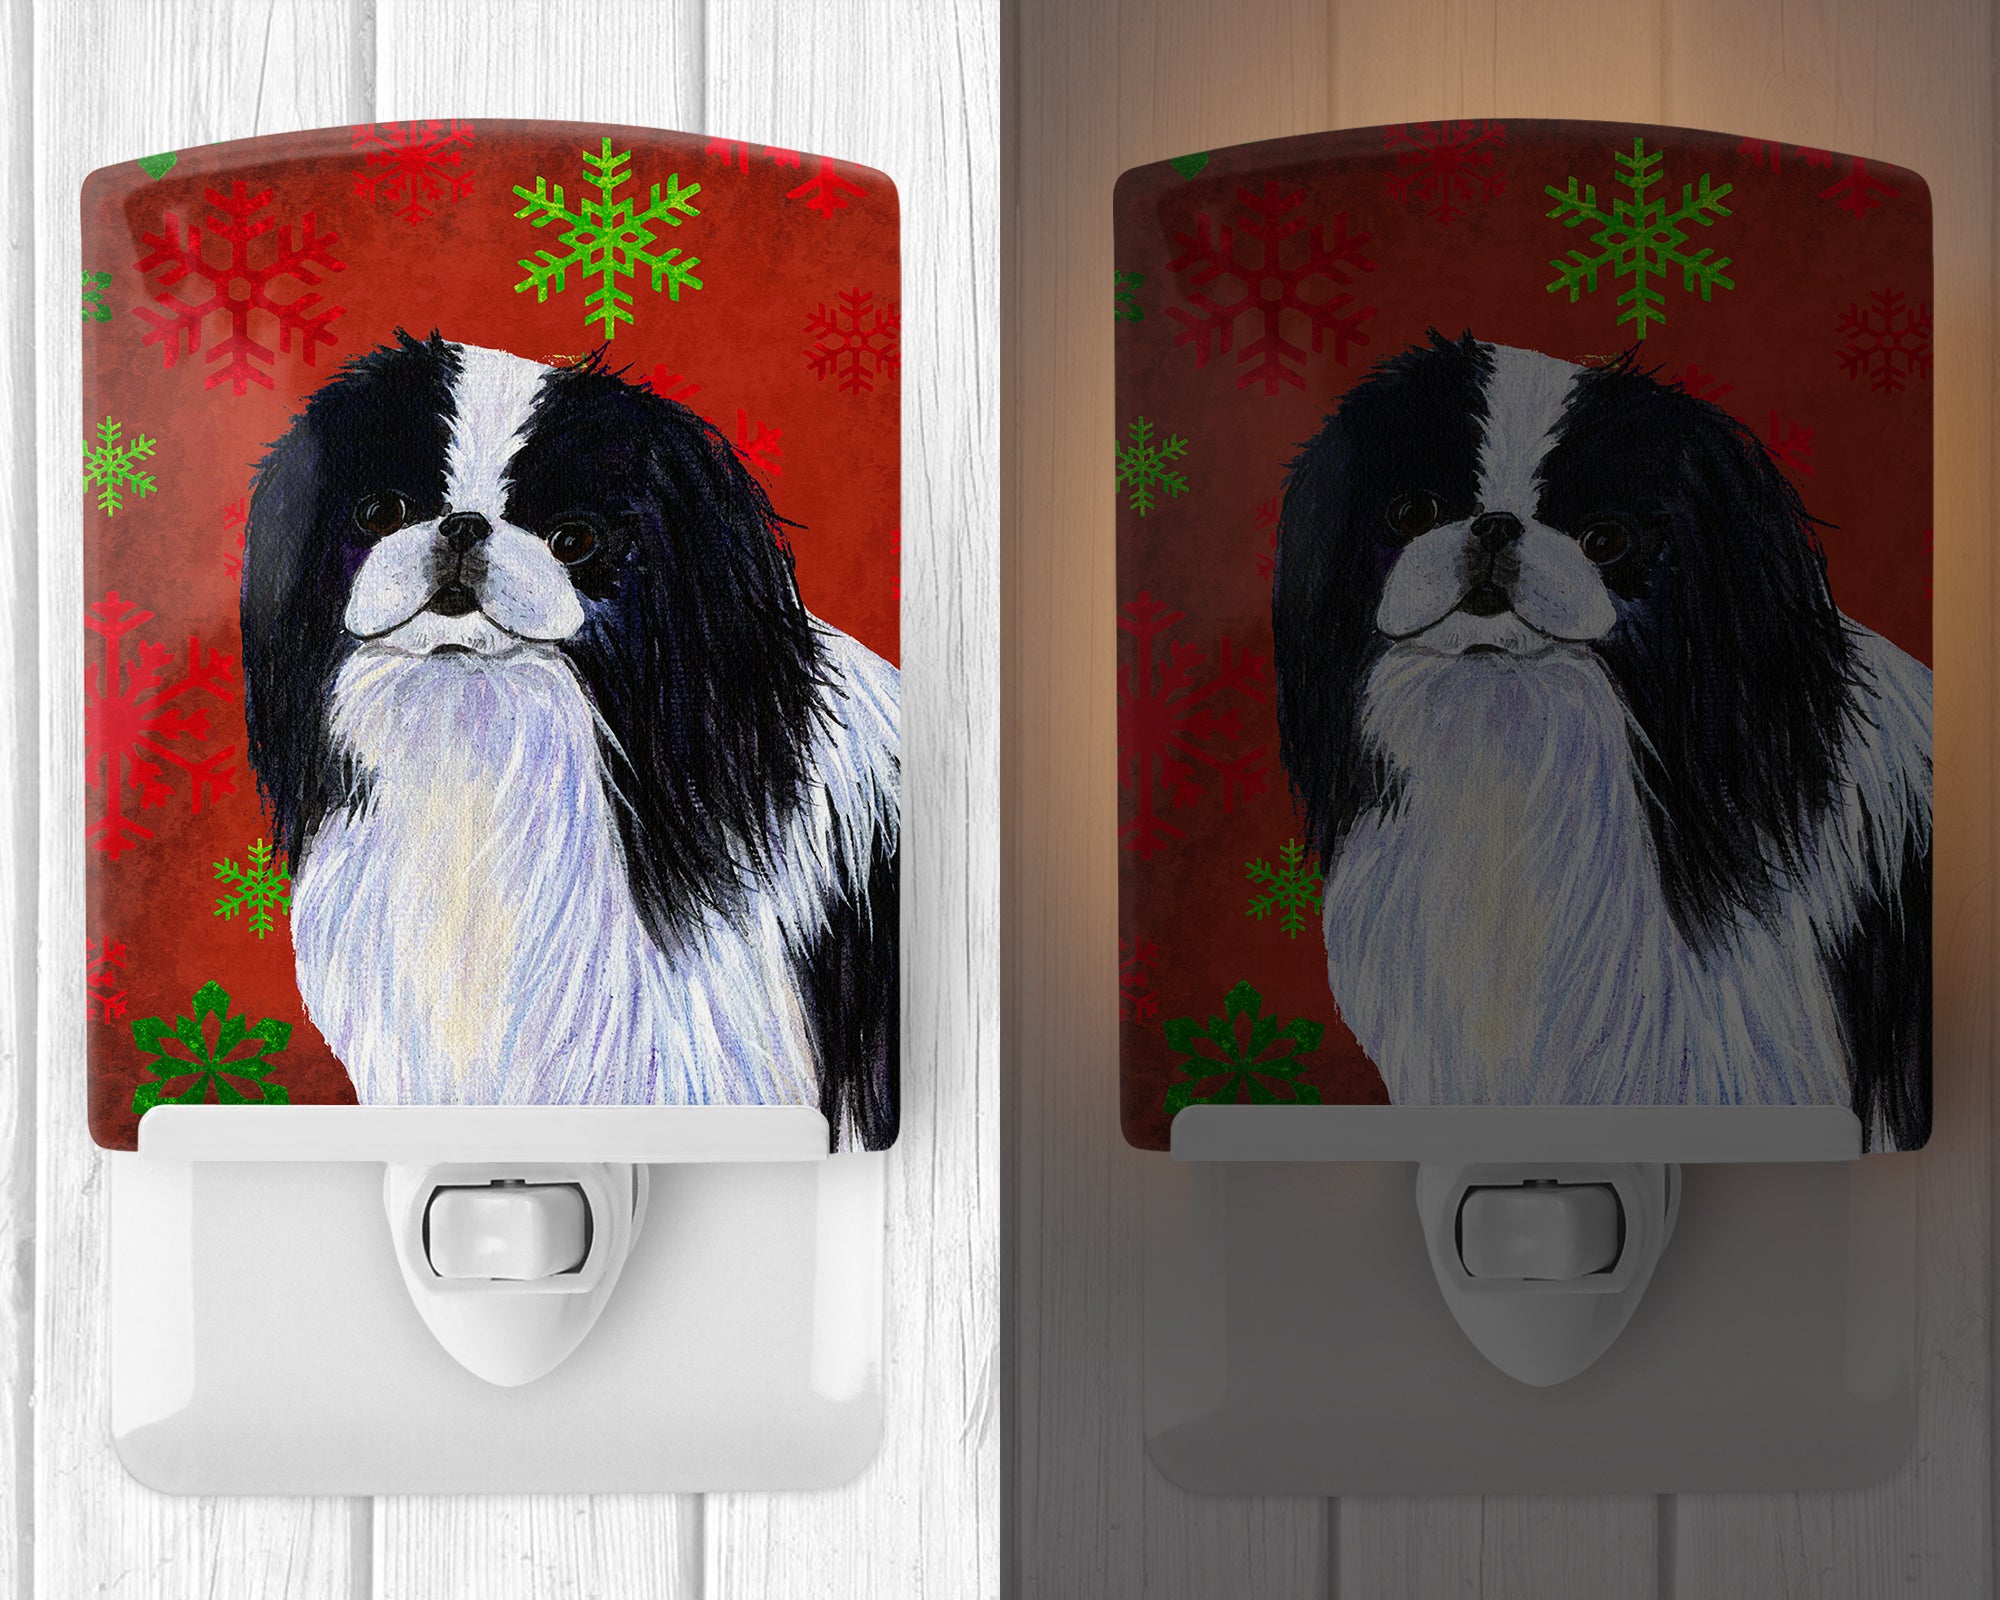 Japanese Chin Red and Green Snowflakes Holiday Christmas Ceramic Night Light SS4674CNL - the-store.com